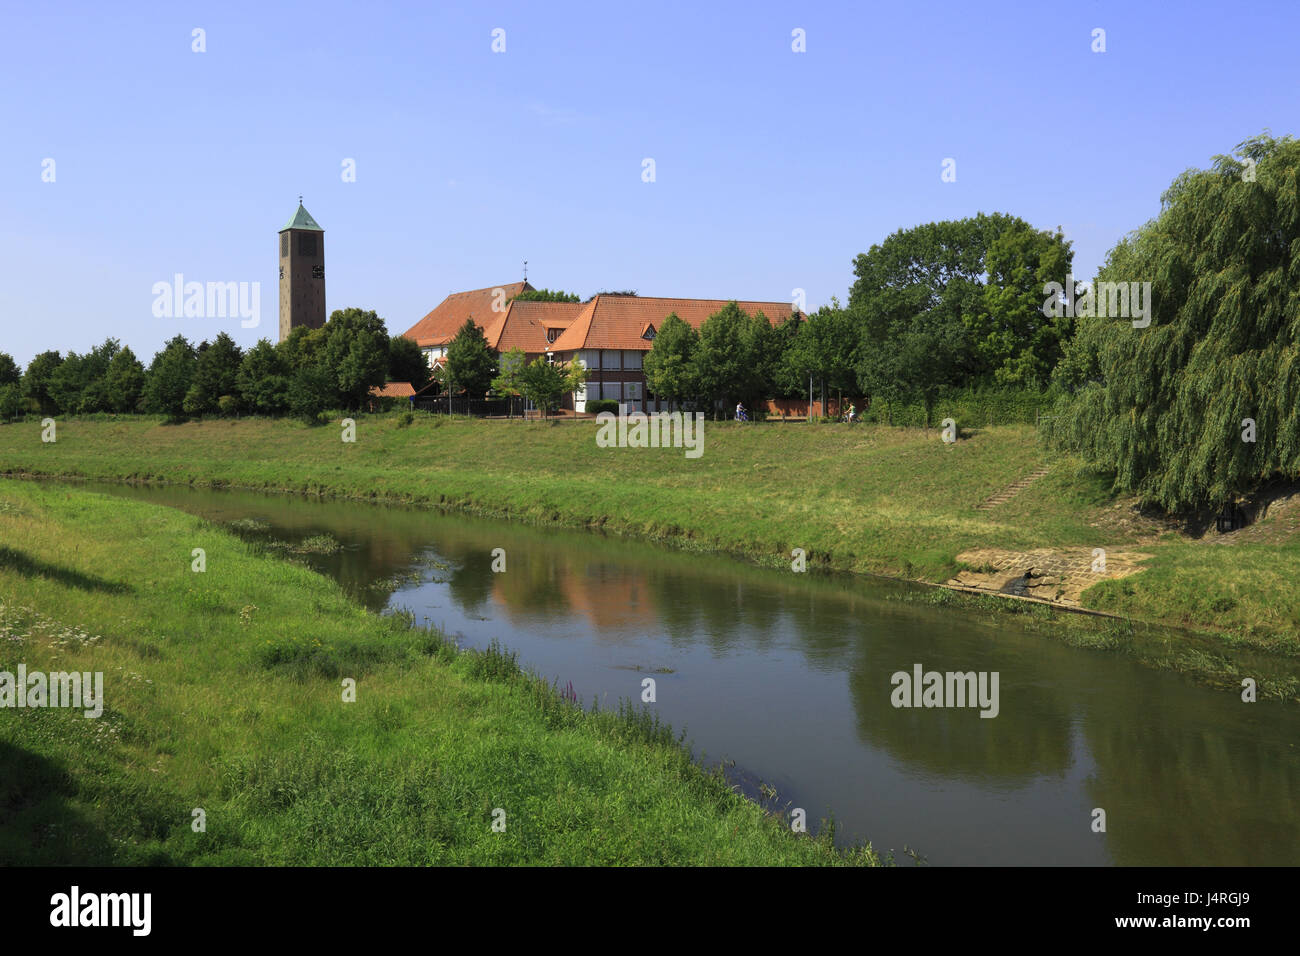 Germany, Löningen, big hare, hare's valley, Oldenburg cathedral country, Lower Saxony, town panorama, hare's scenery and parish church Saint Vitus, Stock Photo